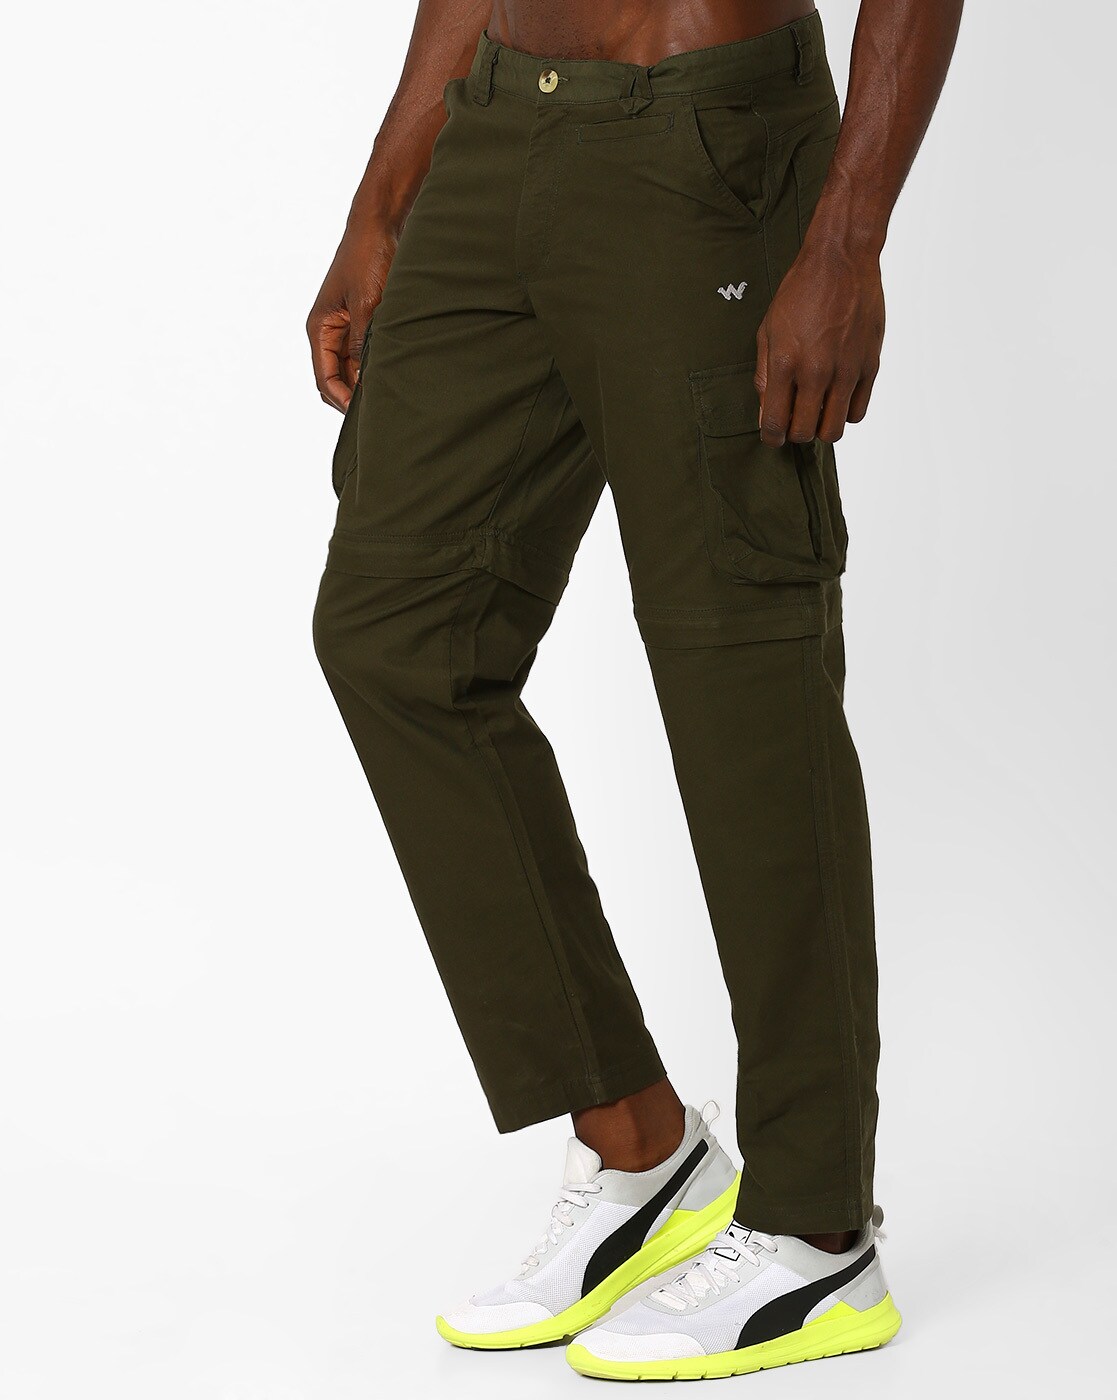 Wildcraft Men's Cotton Track Pants (8903338084587_40322_X-Large_Dark Olive)  : Amazon.in: Clothing & Accessories